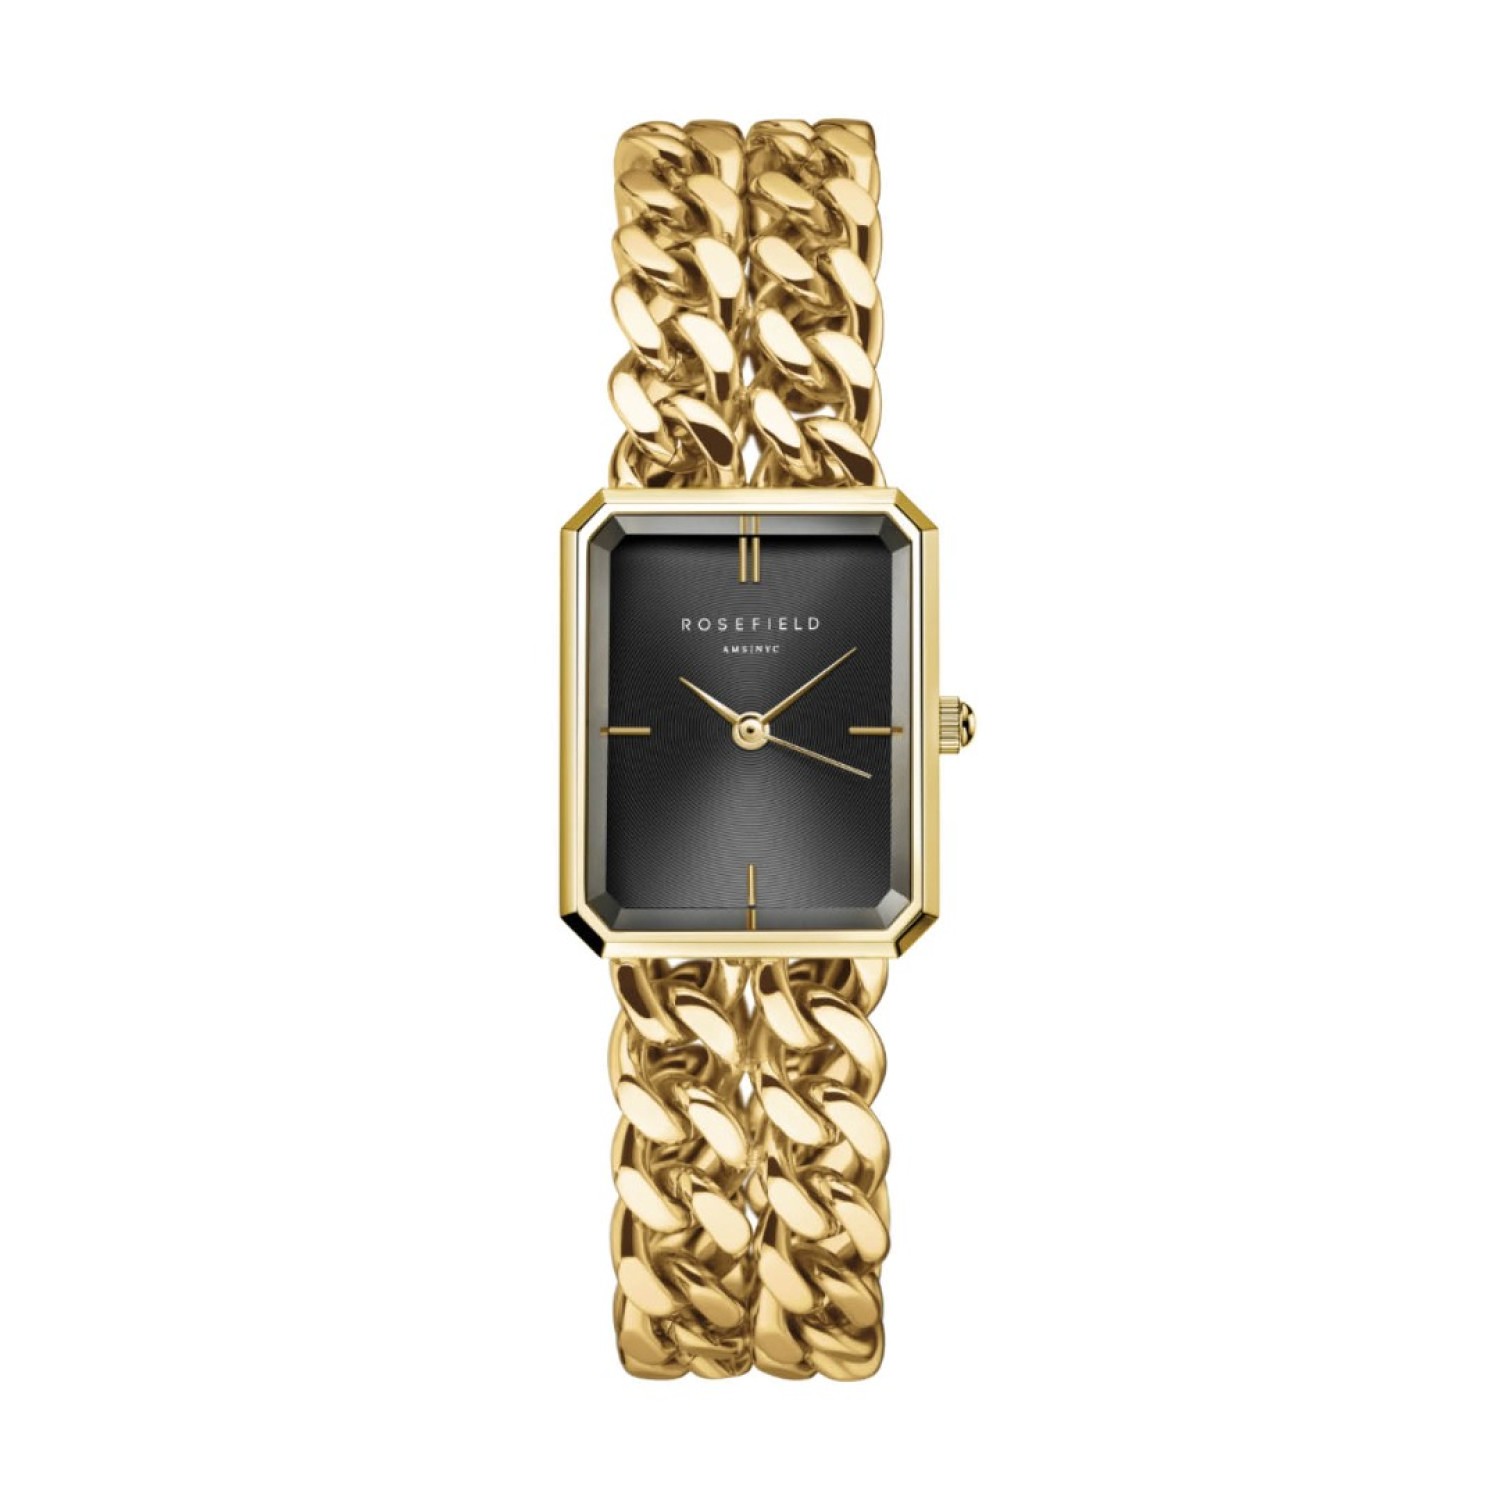 SBGSG-O77 Rosefield Octagon XS Studio Double Chain in Gold SGSSS-O78 Rosefield Watches Auckland | With their stylish designs and packaging, Rosefield watches make excellent gifts for special occasions.